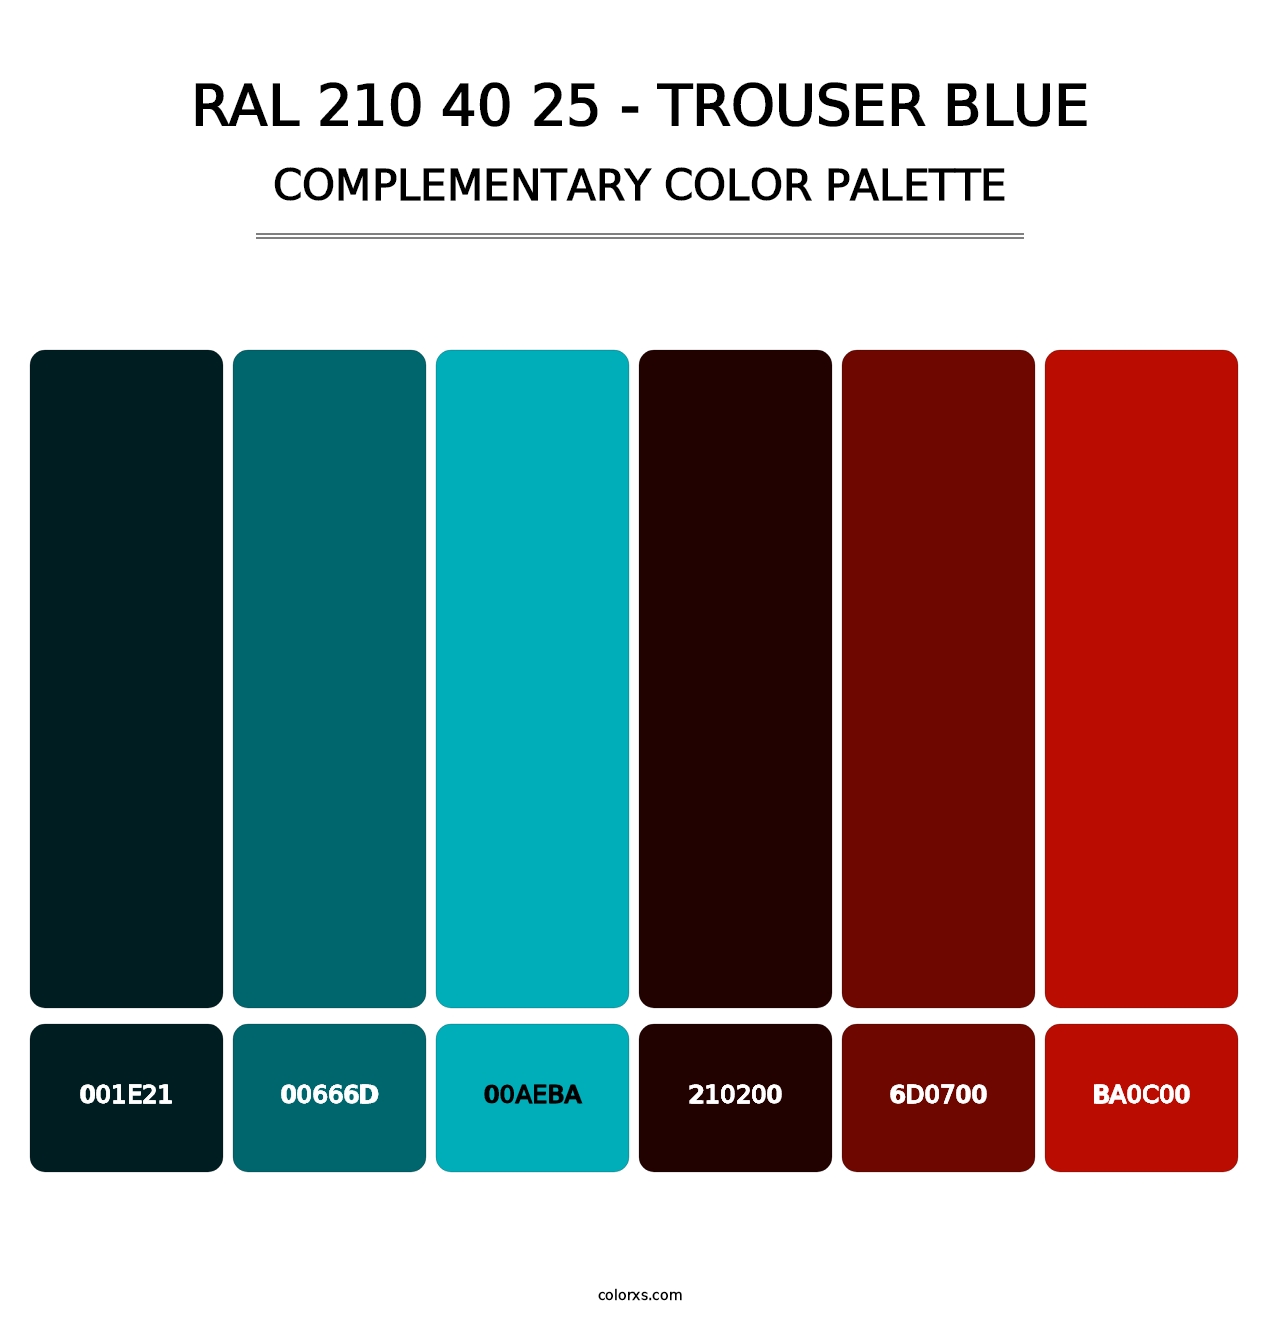 RAL 210 40 25 - Trouser Blue - Complementary Color Palette